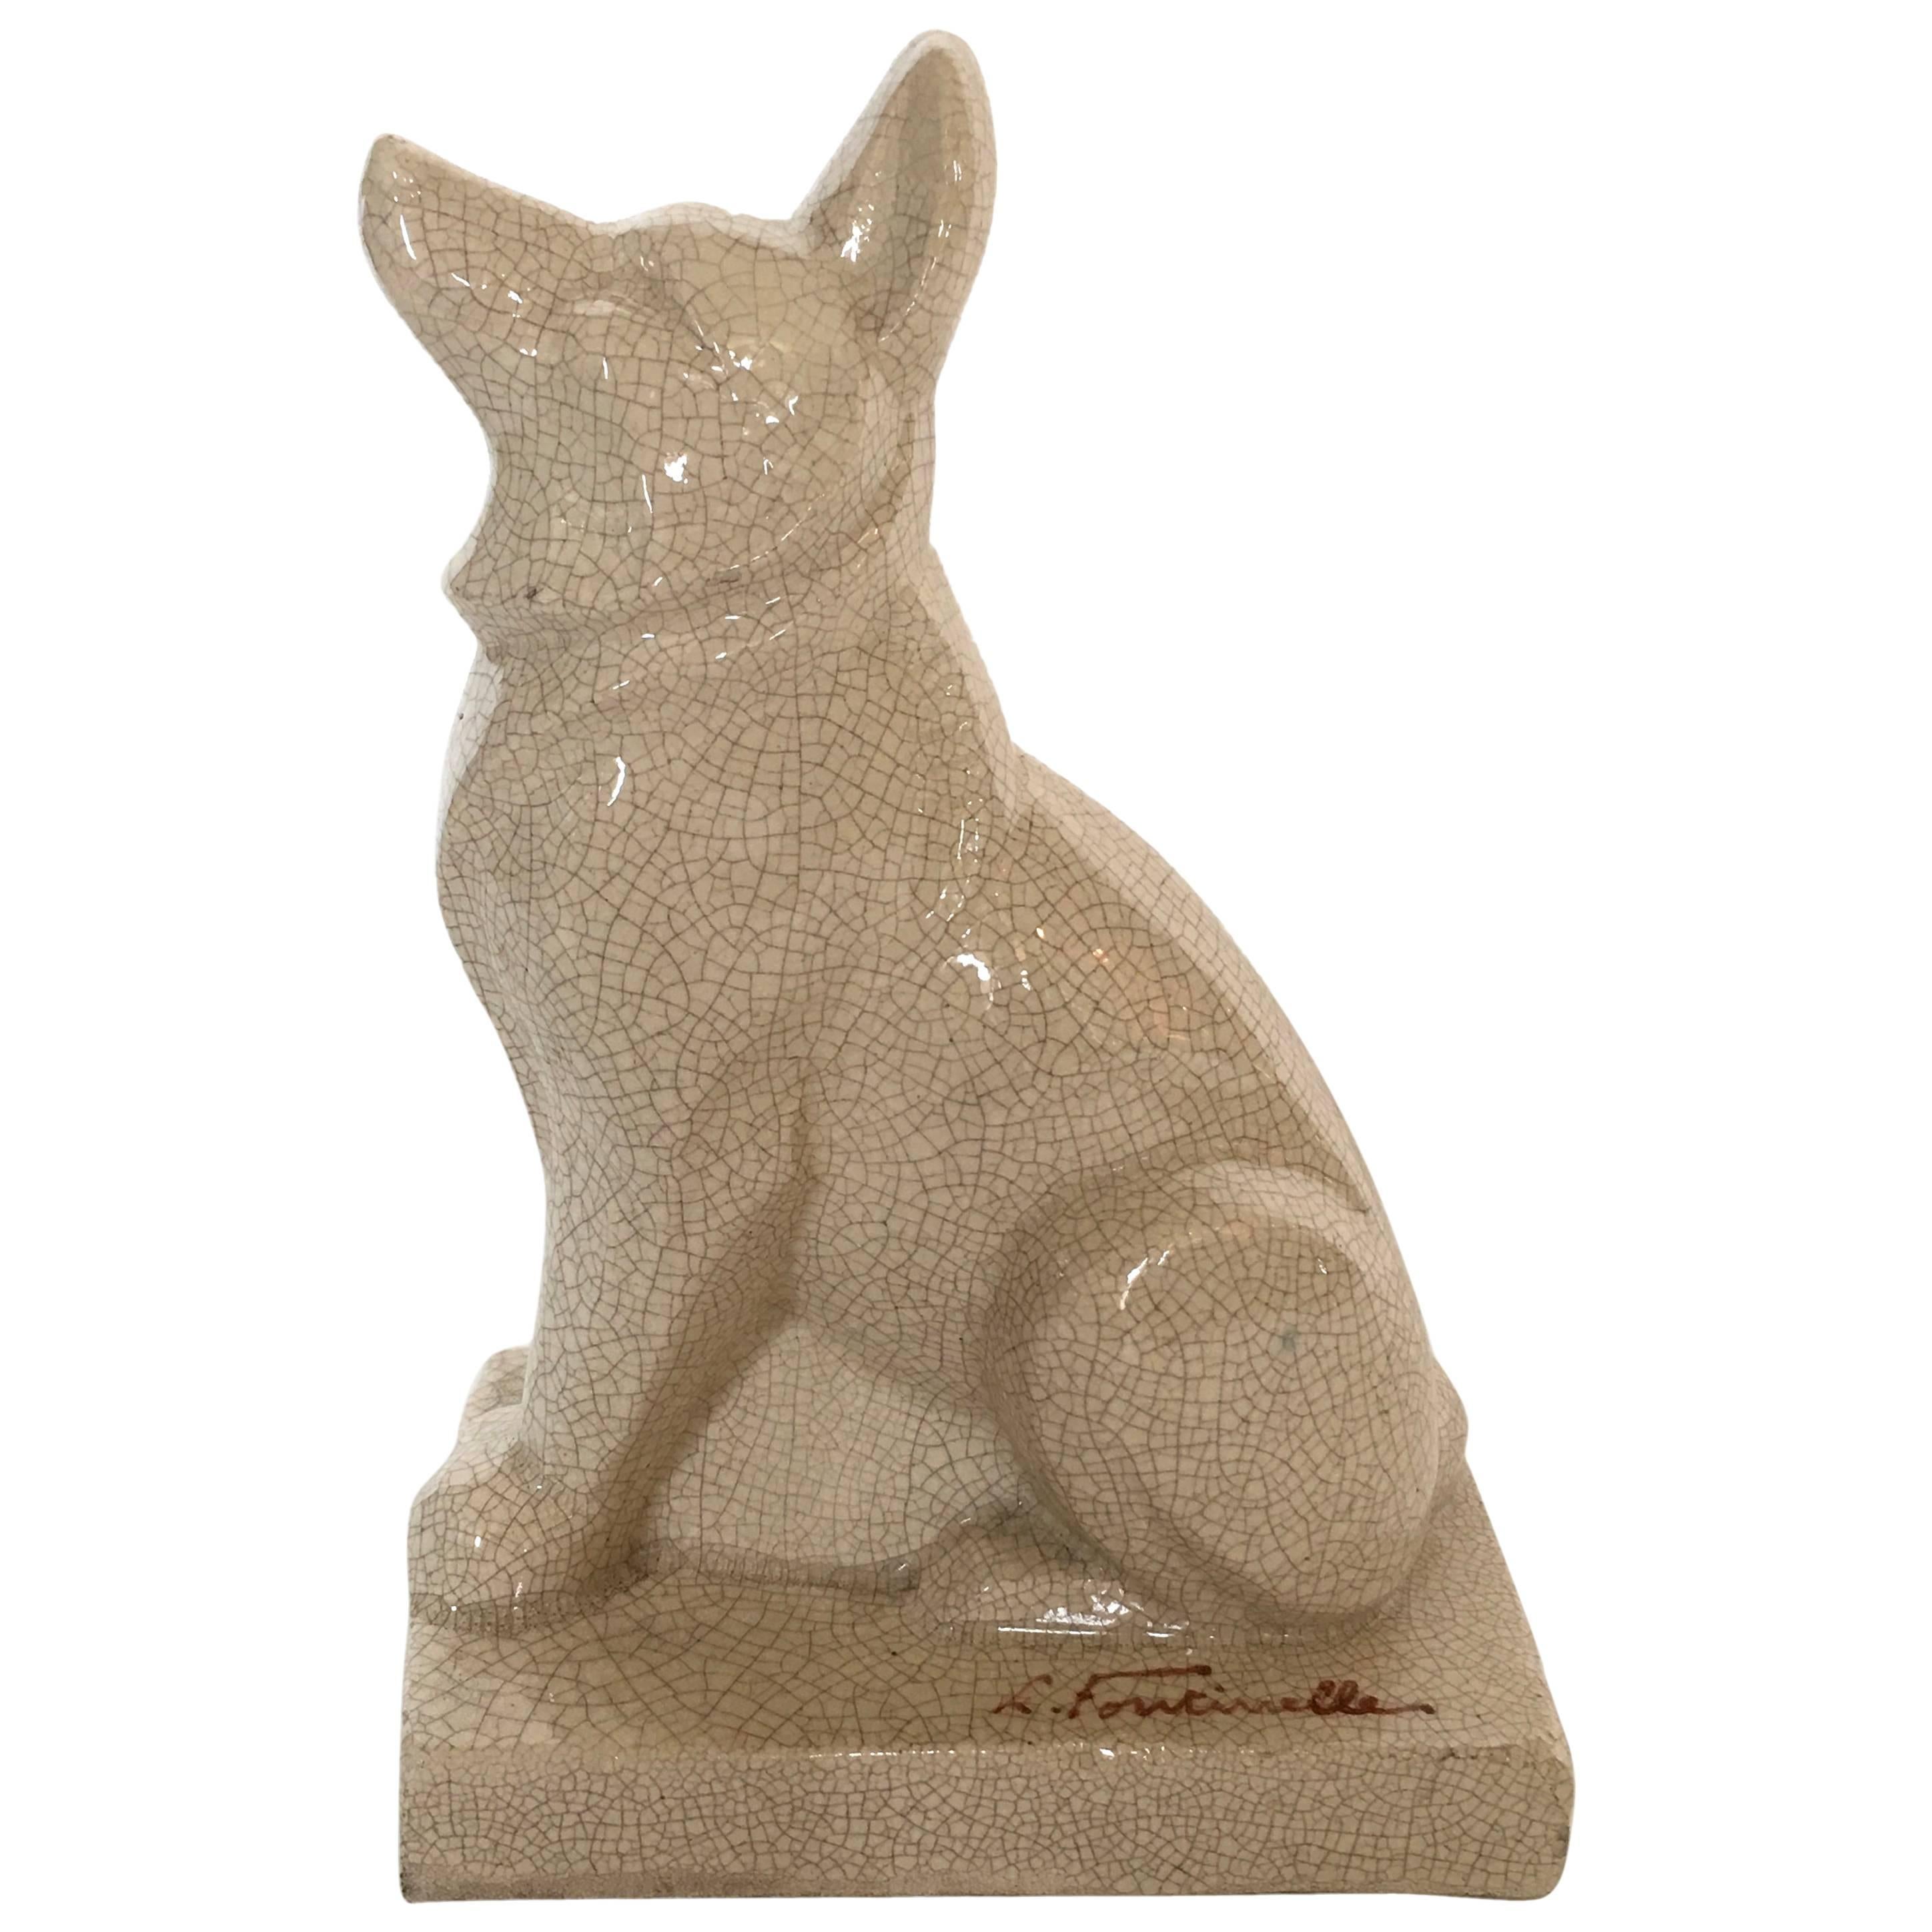 French Art Deco Ceramic Dog Sculpture by Louis Fontinelle